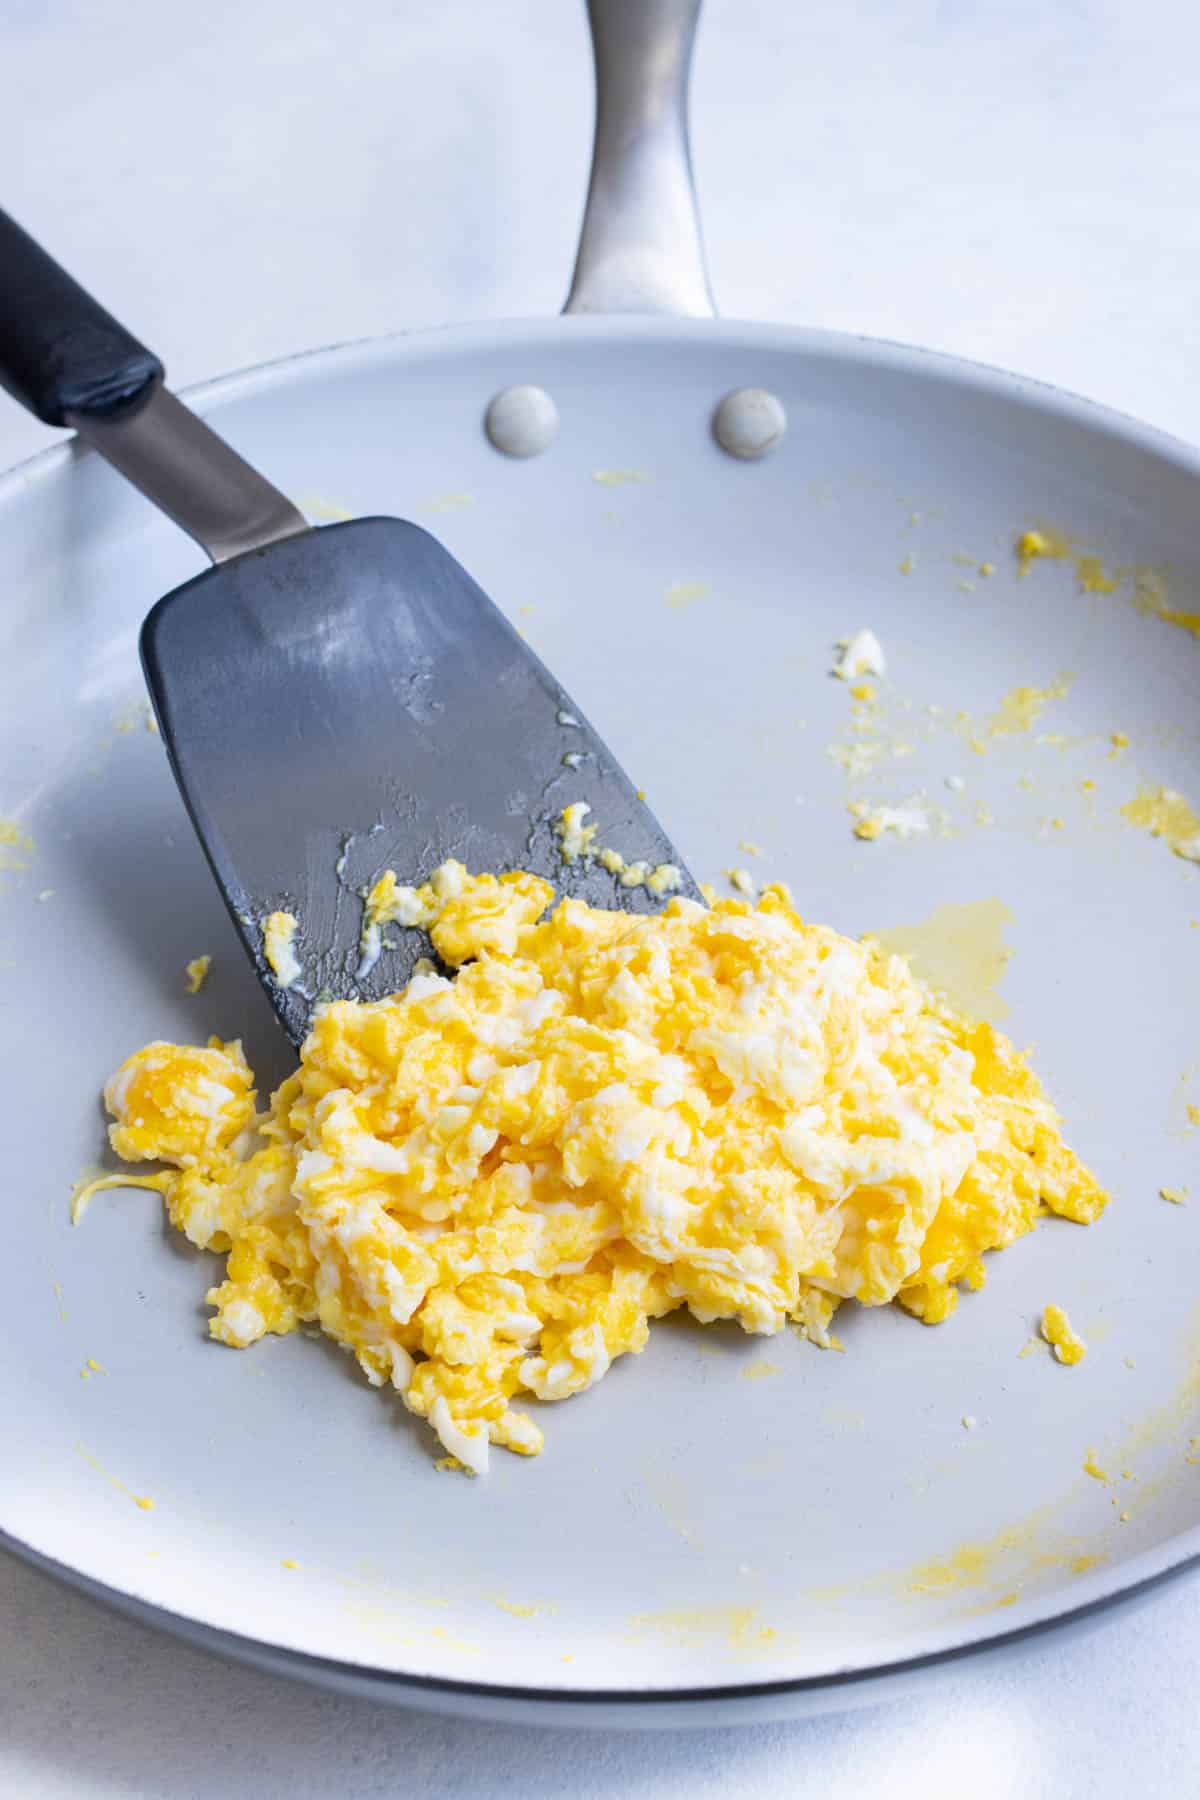 Eggs are scrambled in a large skillet.